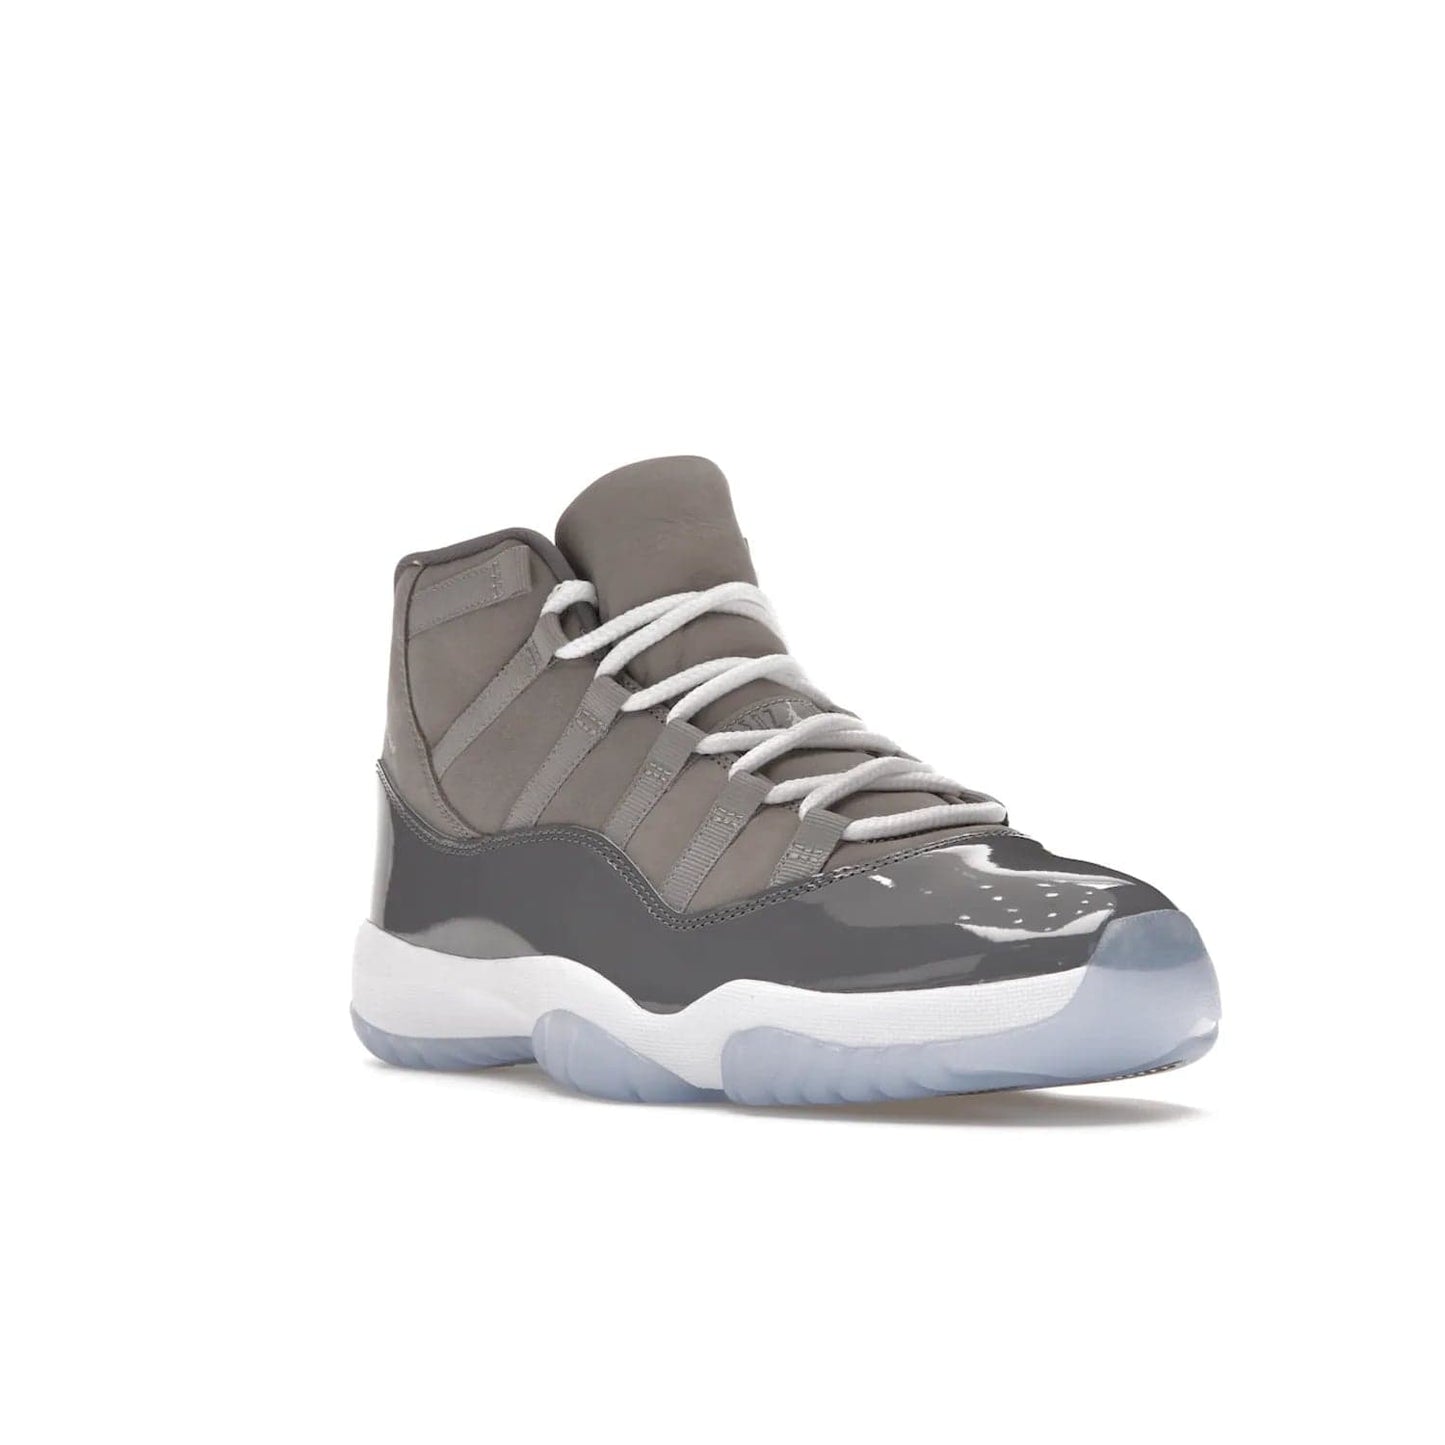 Jordan 11 Retro Cool Grey (2021) - Image 6 - Only at www.BallersClubKickz.com - Shop the Air Jordan 11 Retro Cool Grey (2021) for a must-have sneaker with a Cool Grey Durabuck upper, patent leather overlays, signature Jumpman embroidery, a white midsole, icy blue translucent outsole, and Multi-Color accents.  Released in December 2021 for $225.